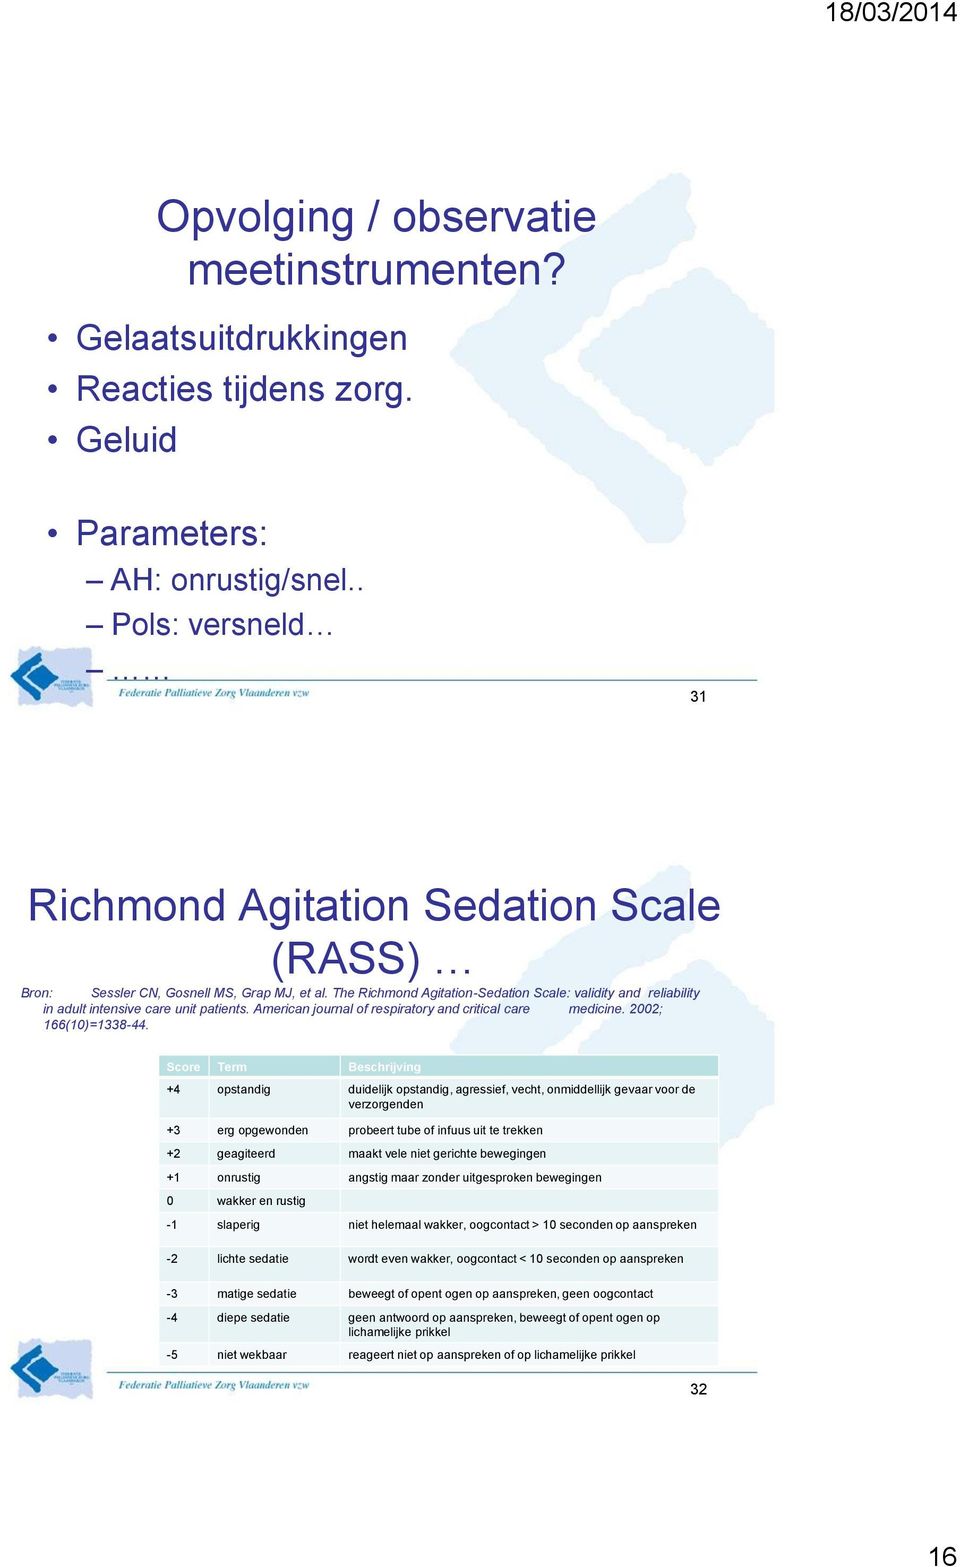 The Richmond Agitation-Sedation Scale: validity and reliability in adult intensive care unit patients. American journal of respiratory and critical care medicine. 2002; 166(10)=1338-44.